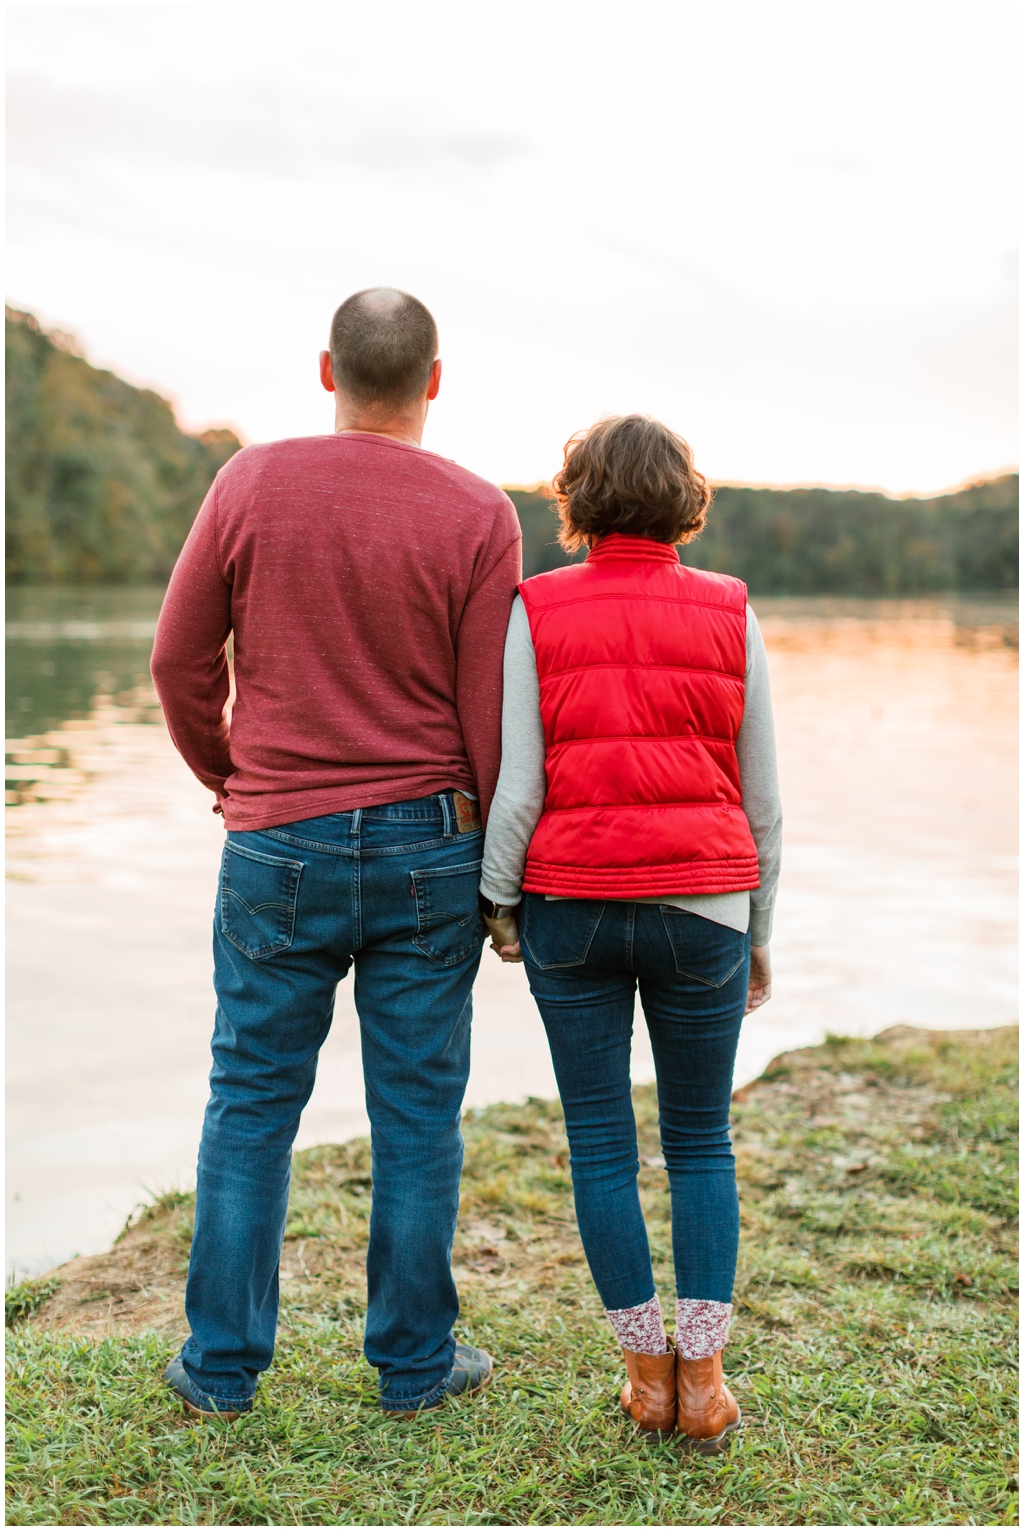 Cozy fall anniversary portraits at Melton Hill Park along the Clinch River 